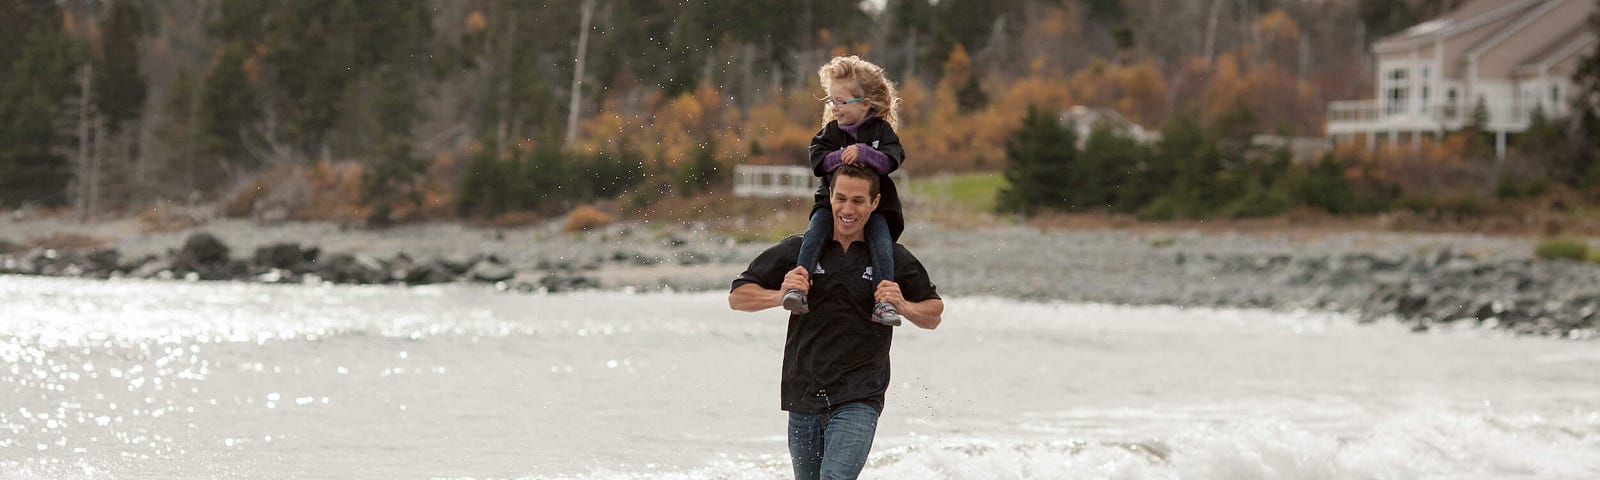 Author with his daughter on his shoulders running in the surf on the beach